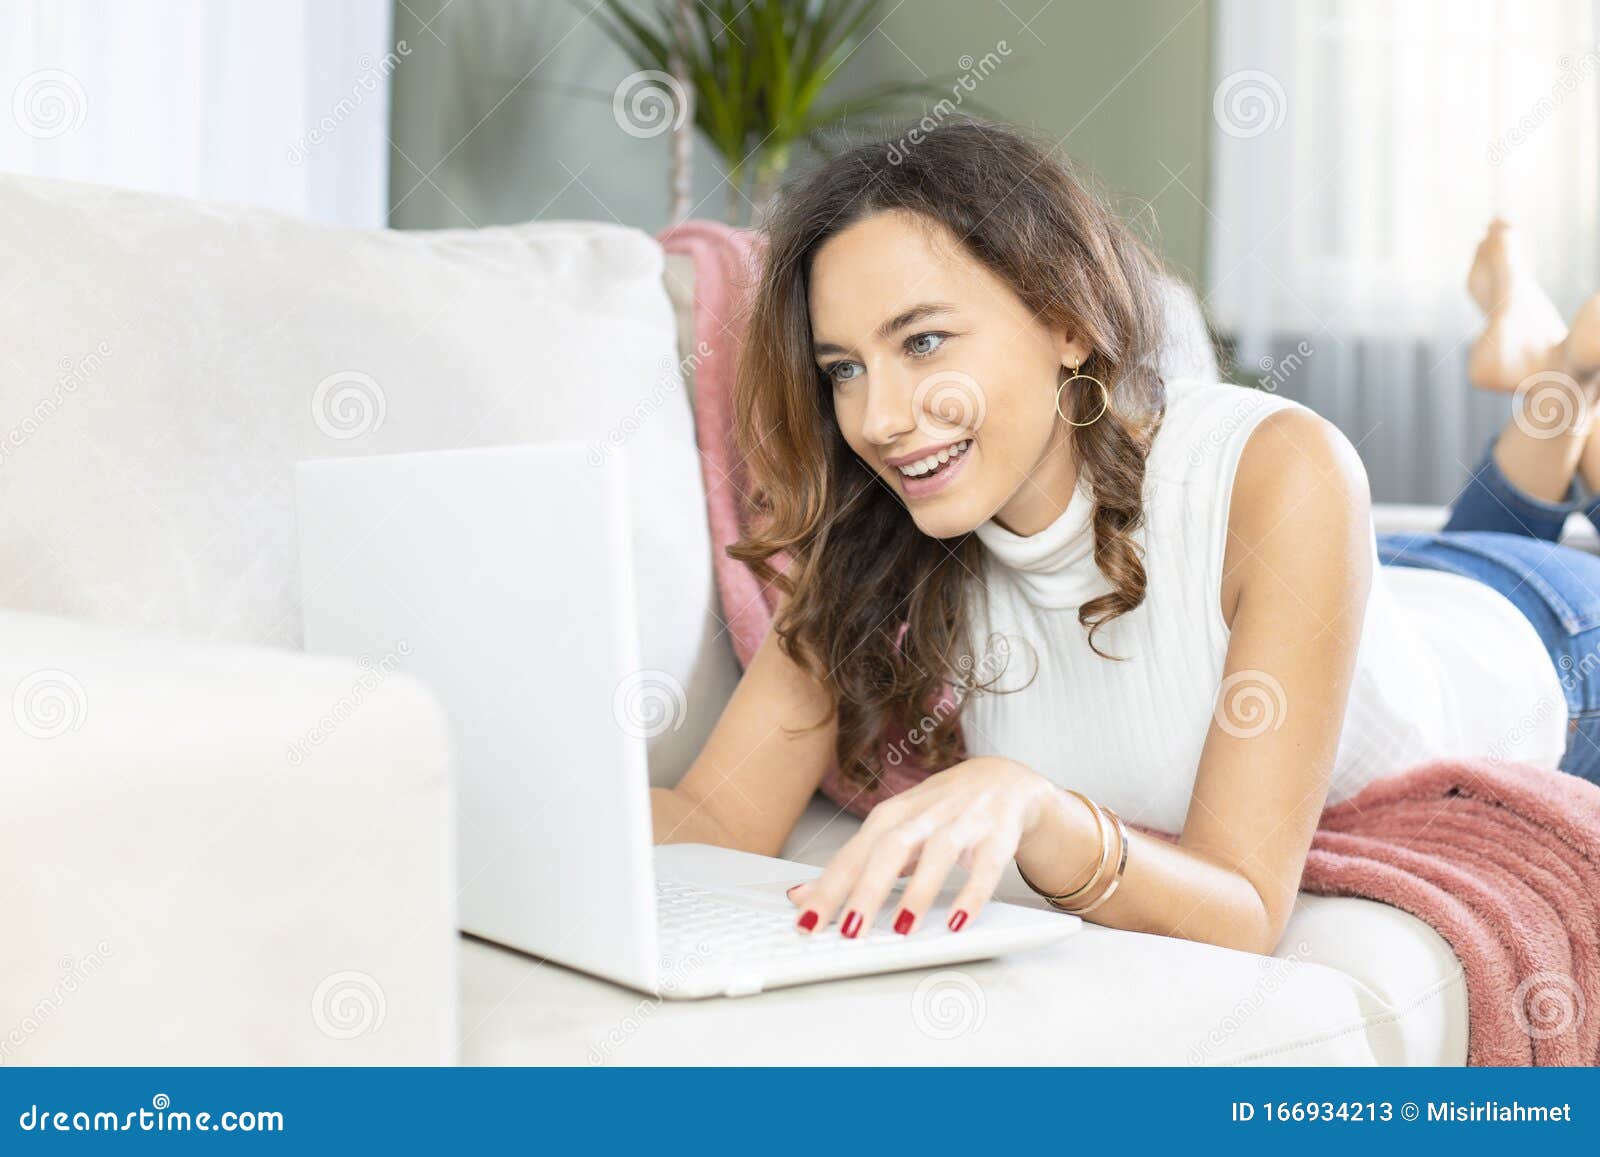 Young Woman Using Laptop on Sofa Stock Image - Image of business ...